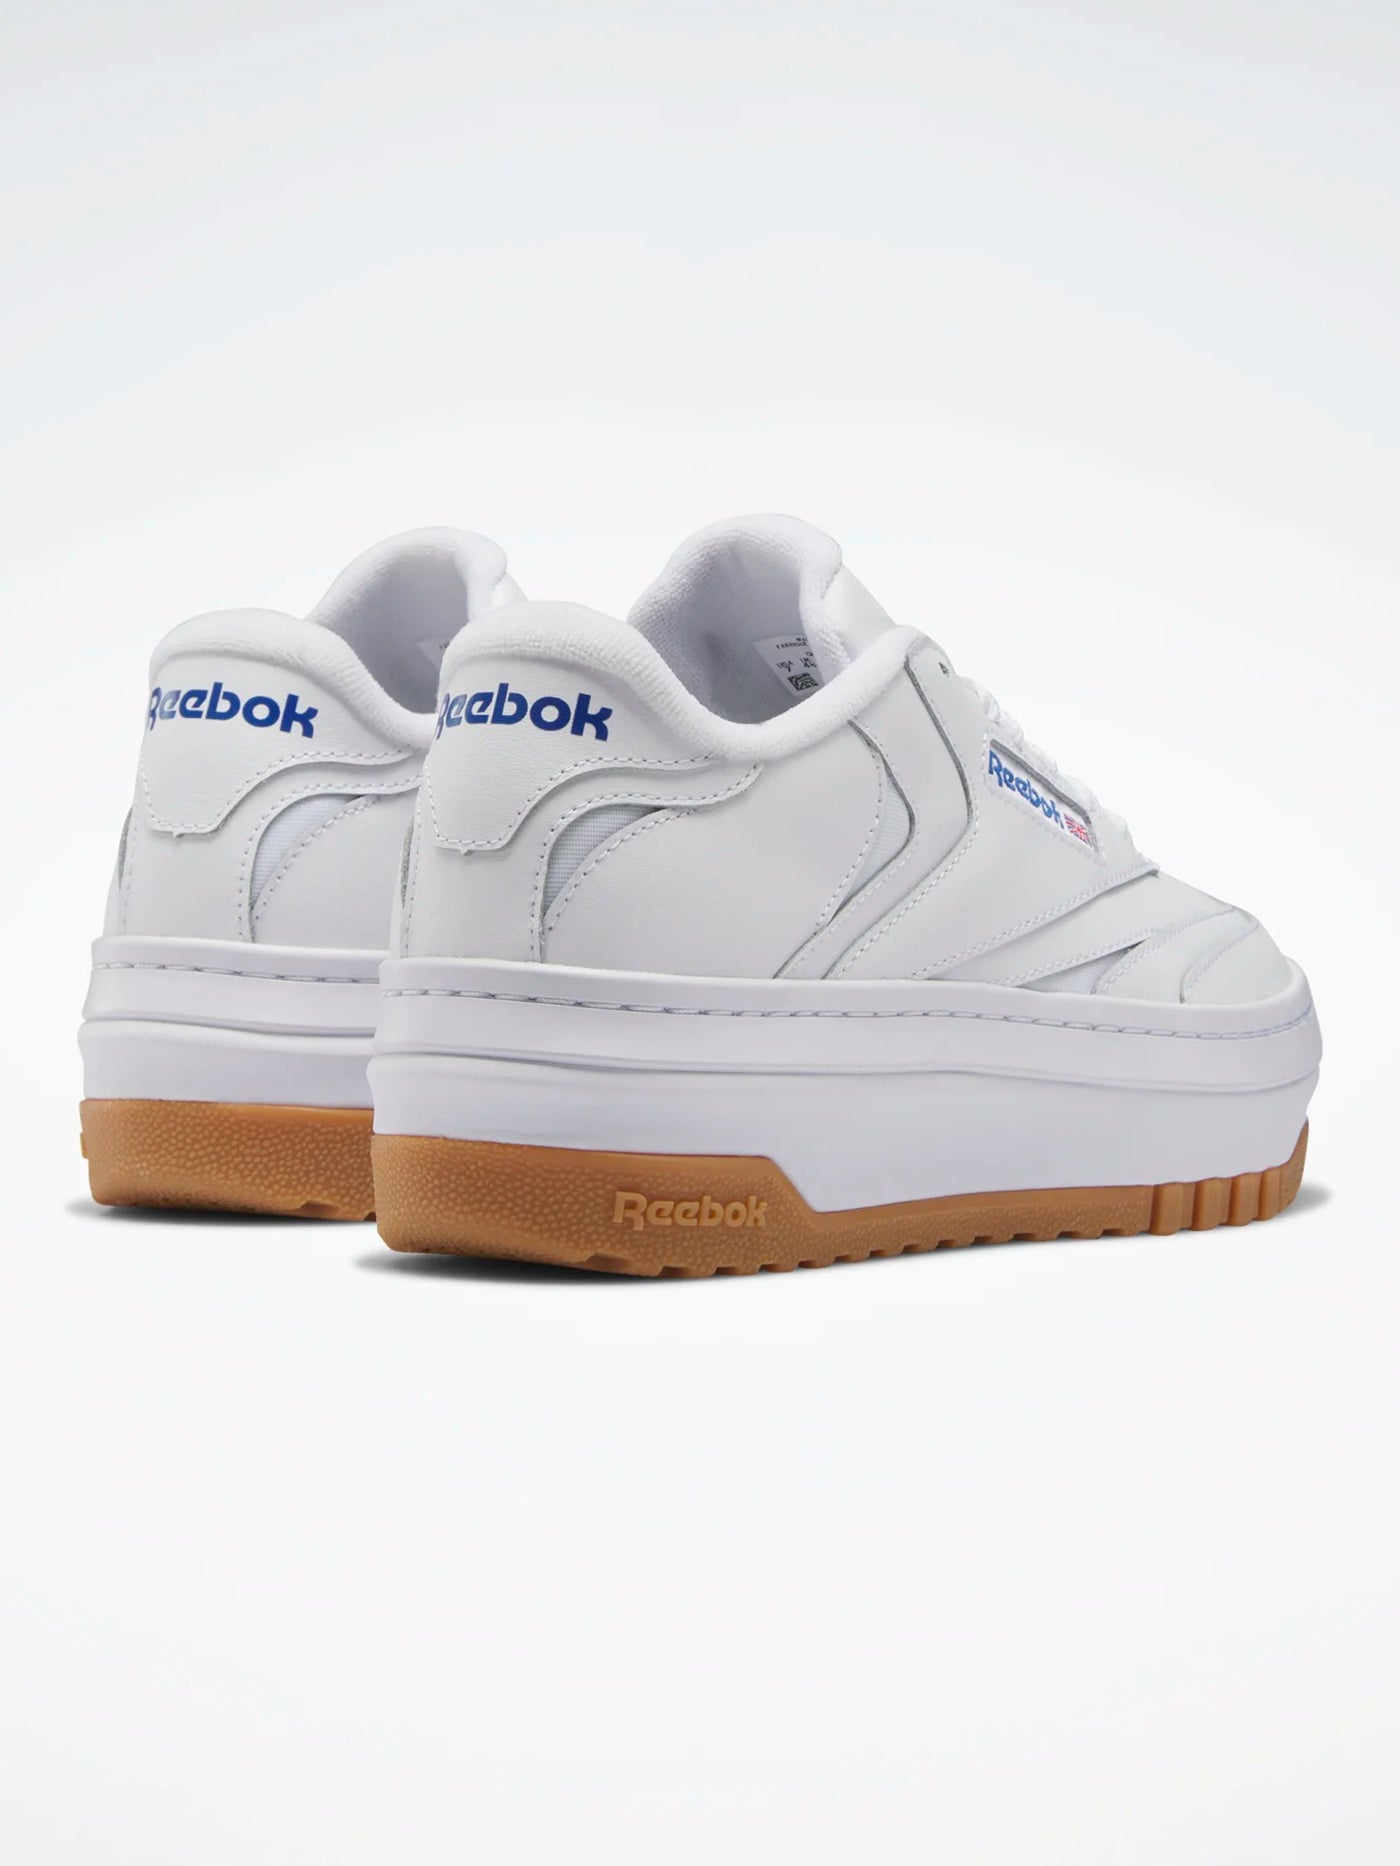 Reebok Spring 2023 Club C Extra White/White/Vector Blue Shoes